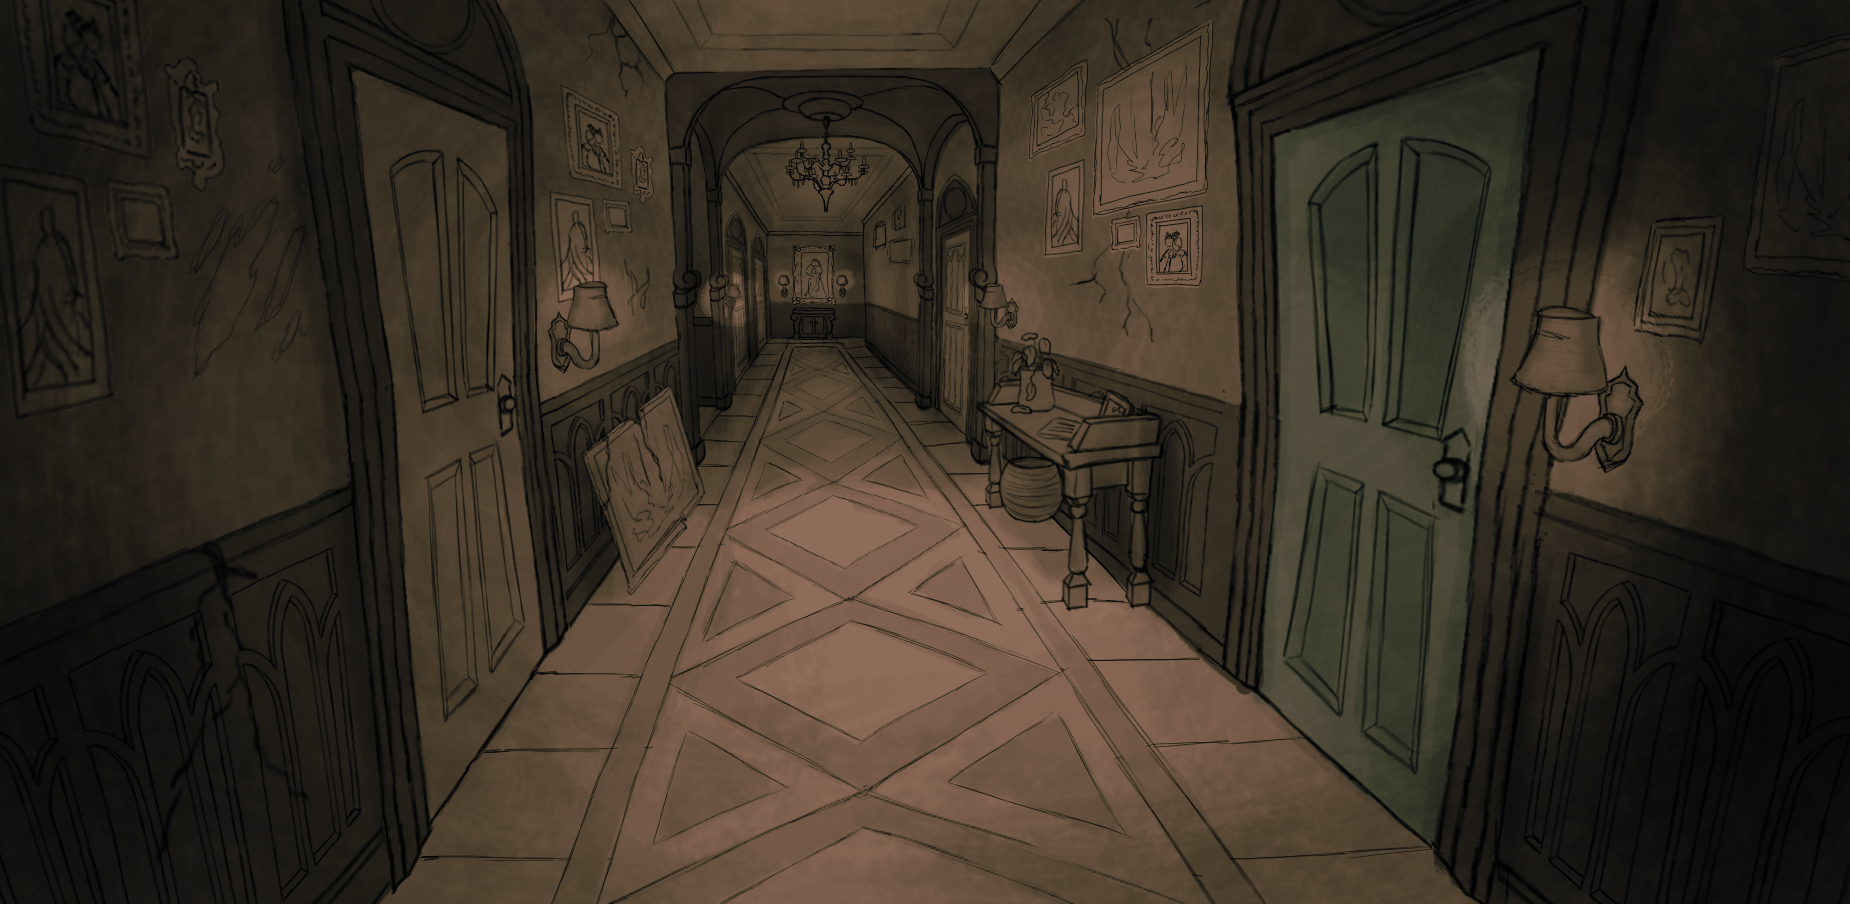 Sketch of the mansion's hallway, sepia colored